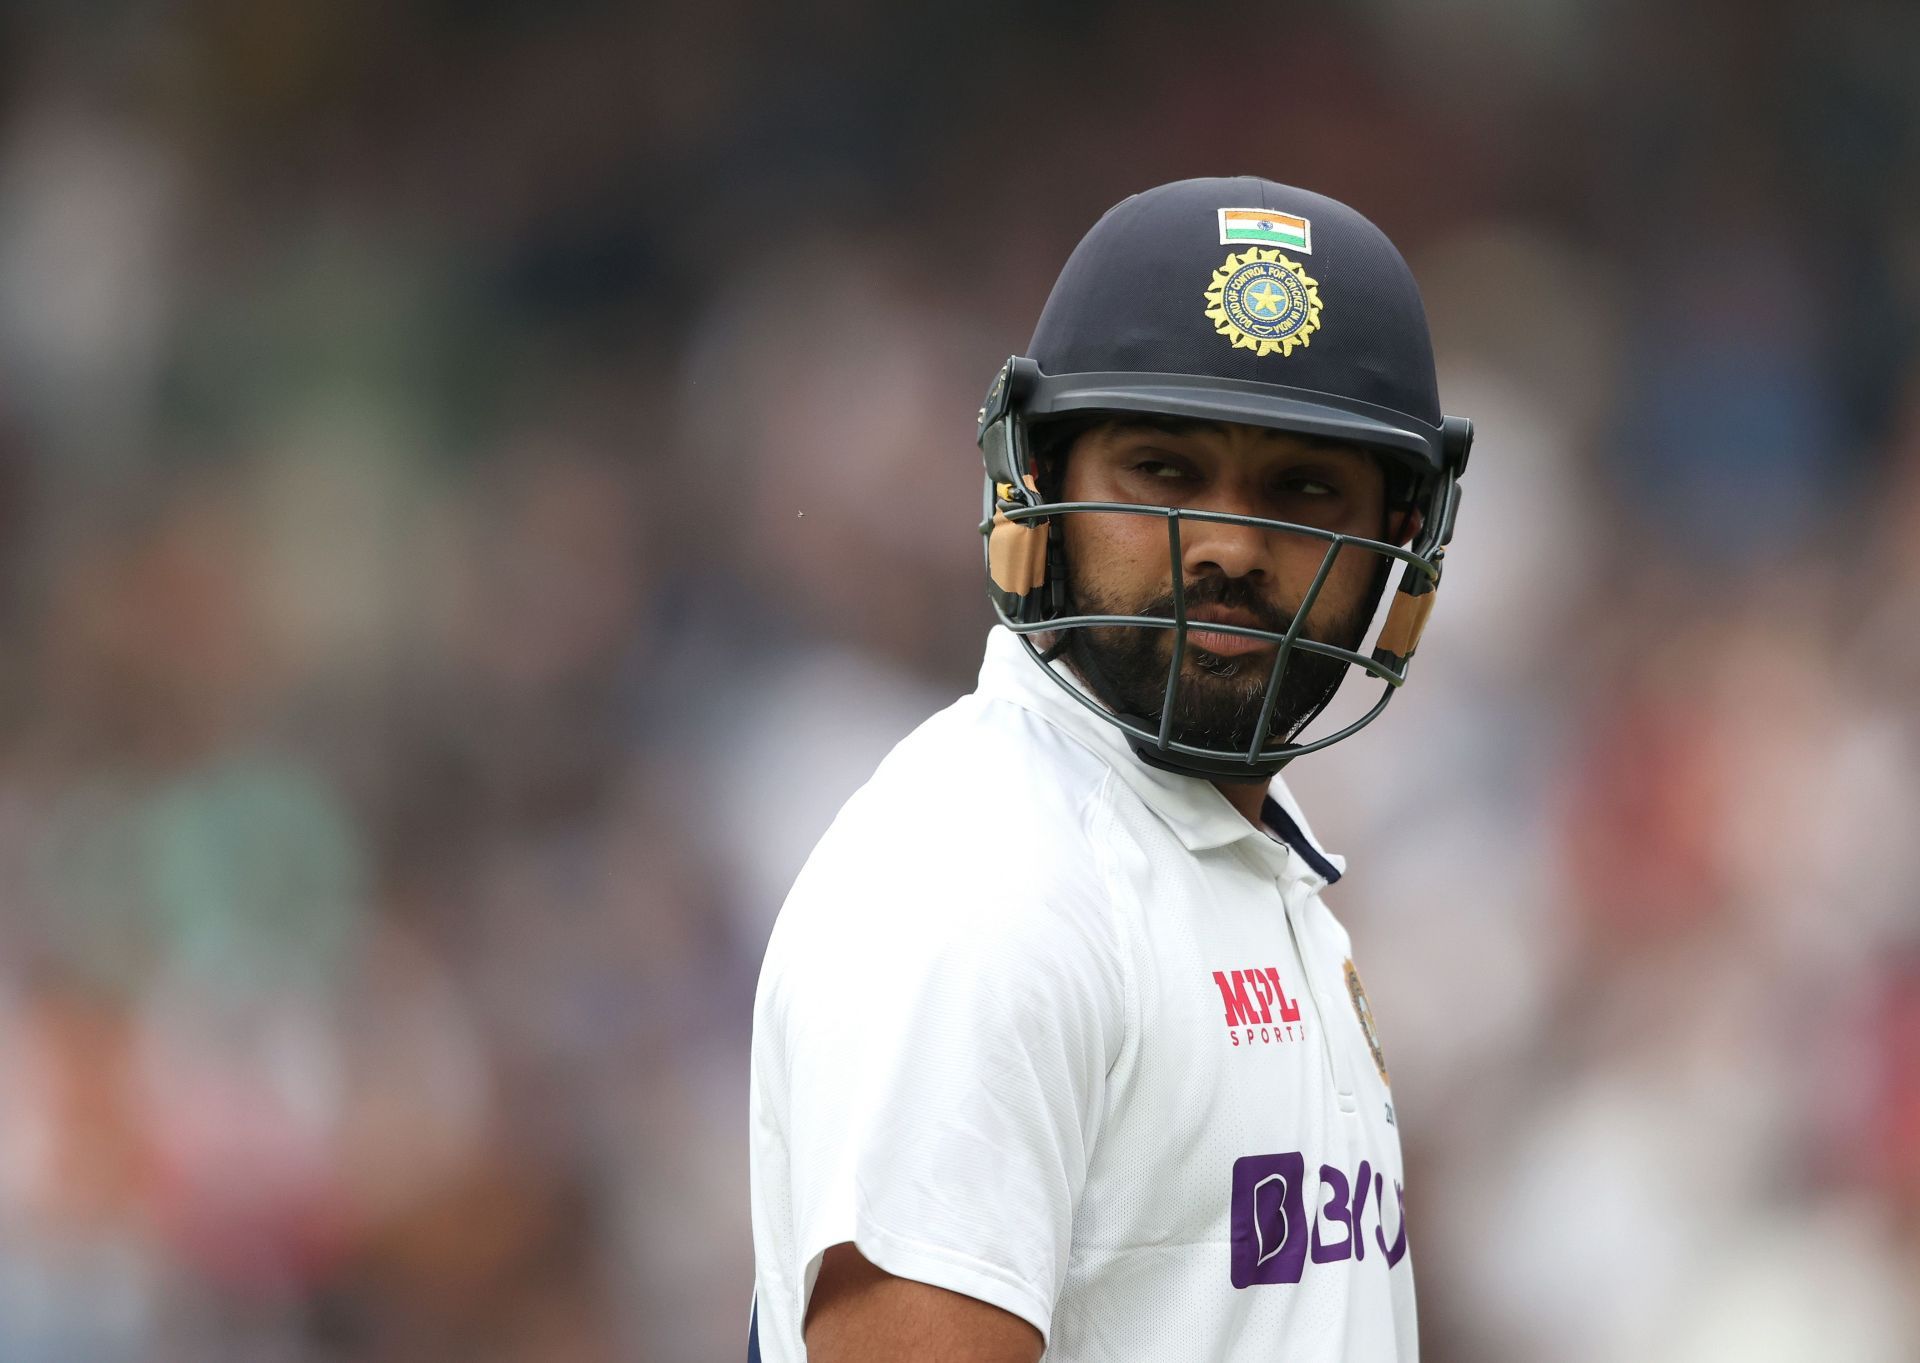 Rohit Sharma finally answered his critics in style with a brilliant tour of England last year. (P.C.:Getty)